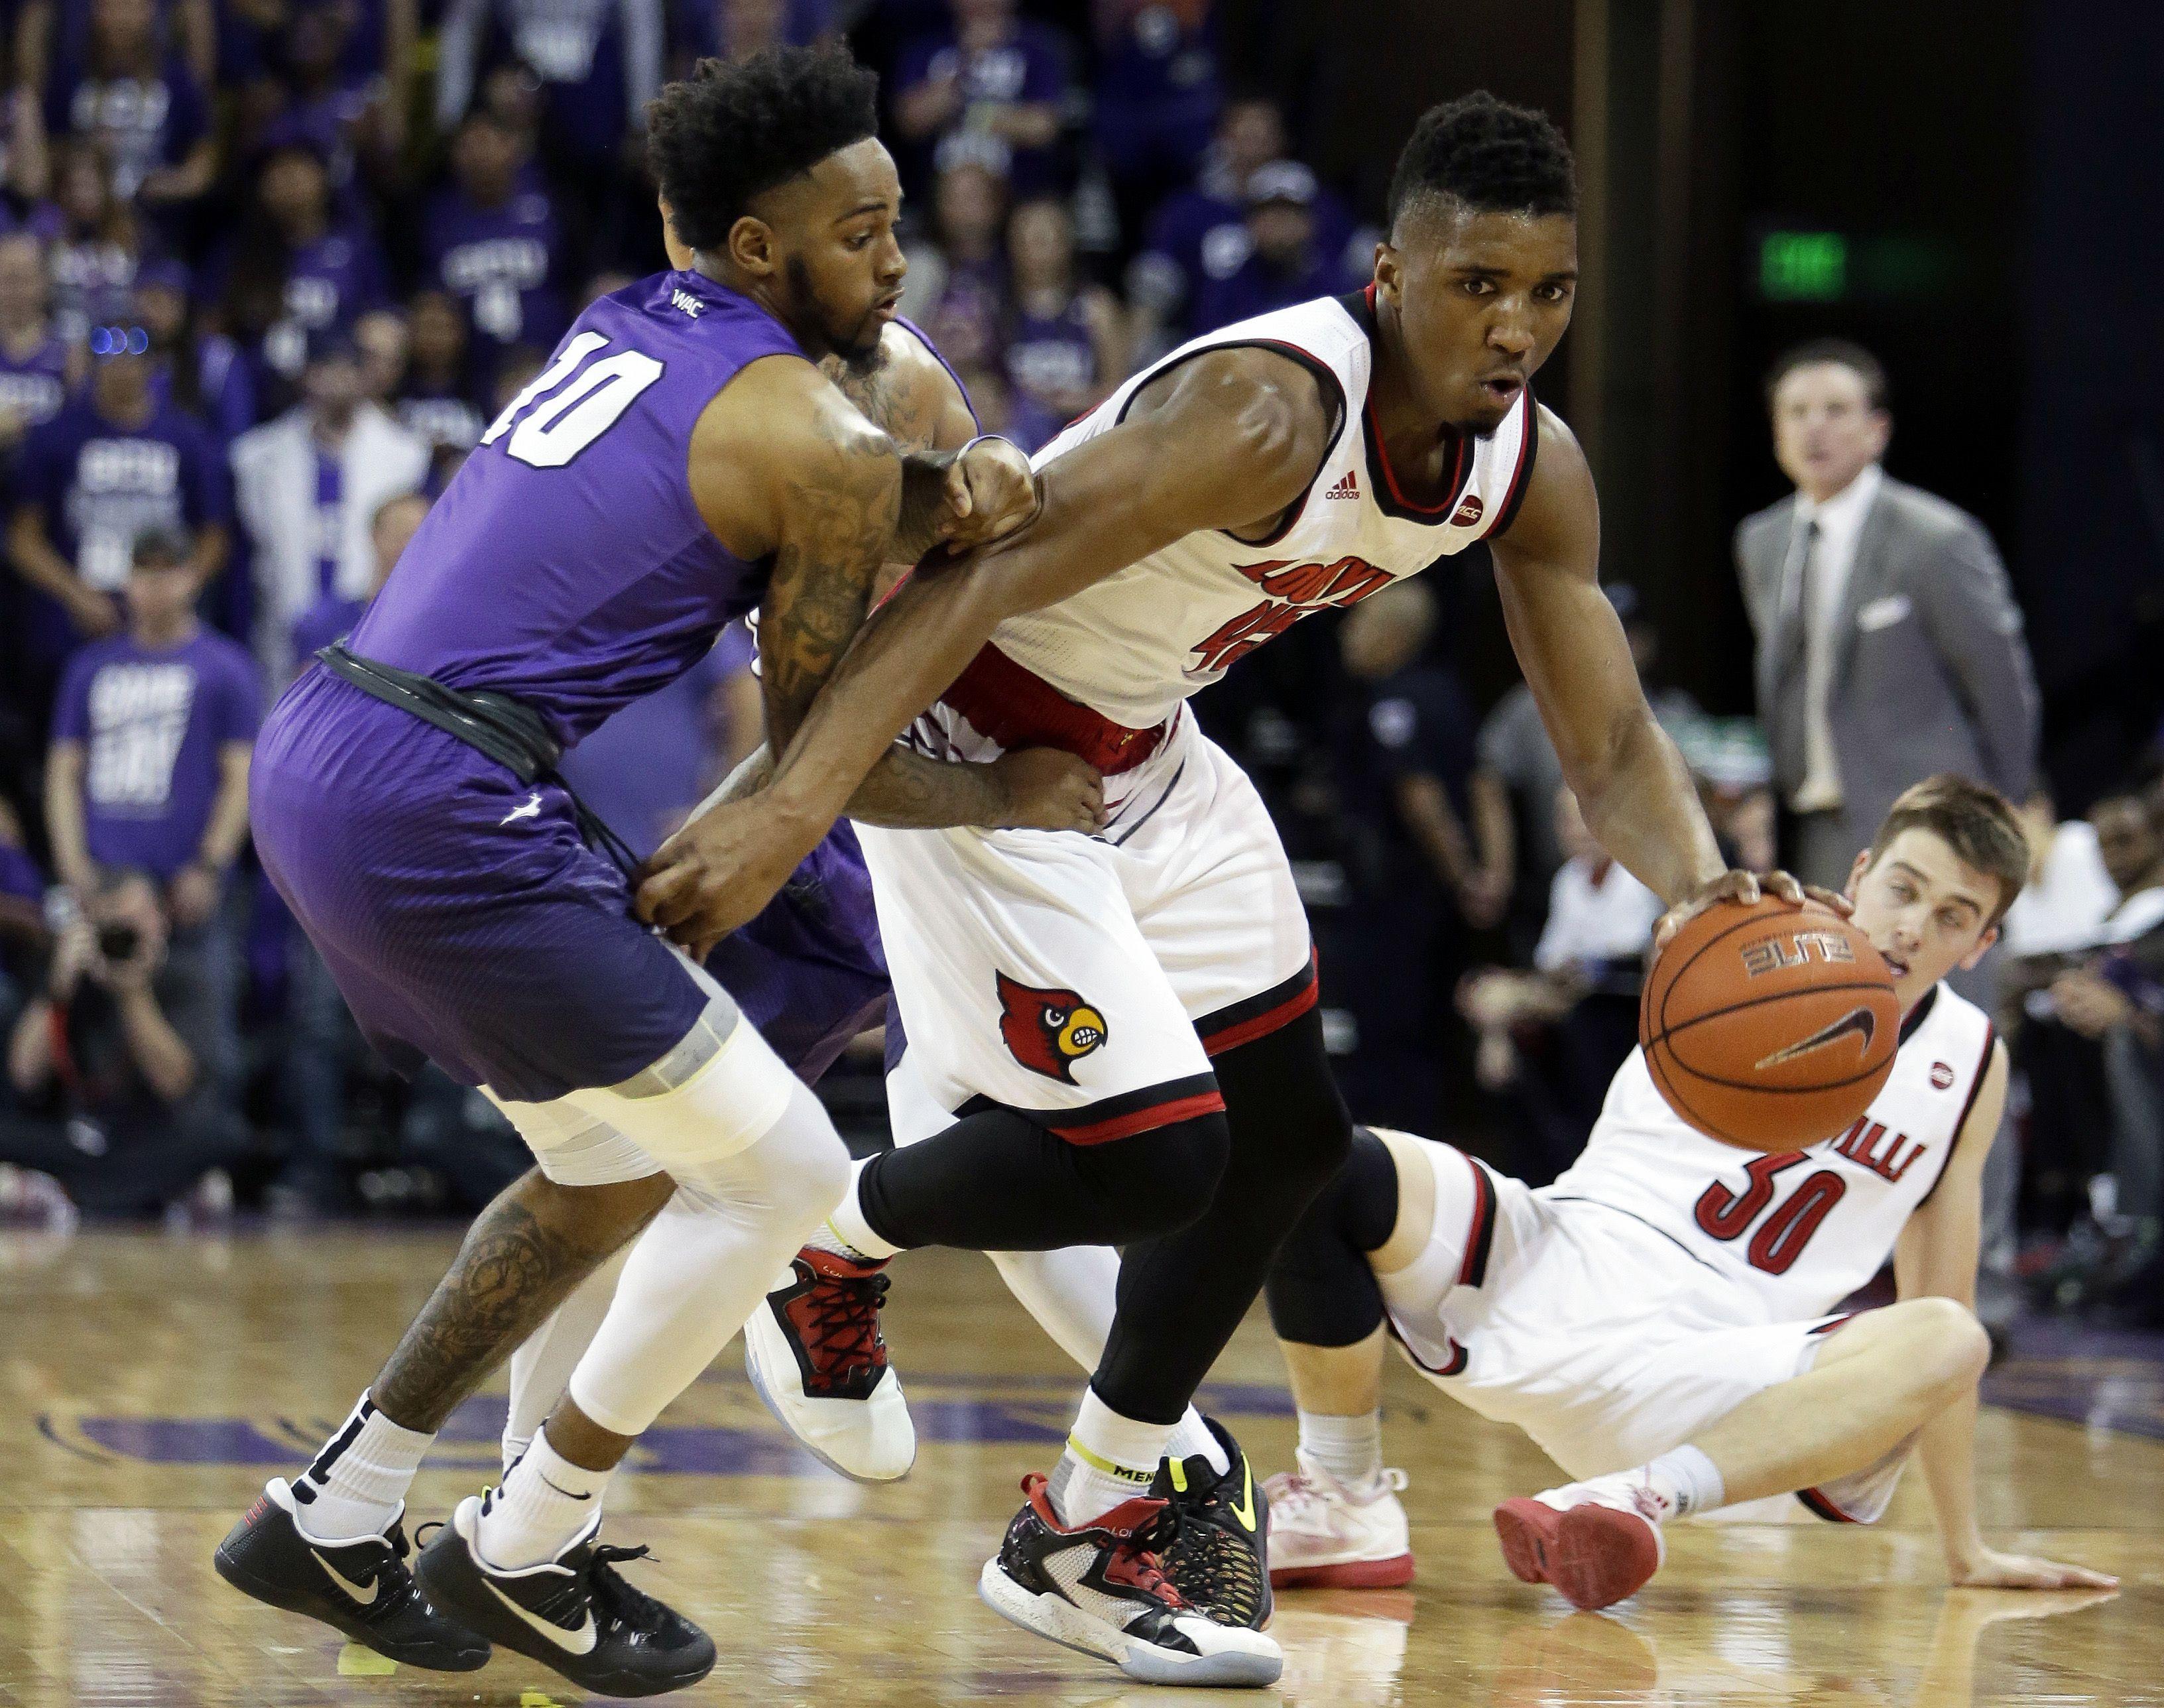 Grand Canyon University Basketball Logo - No. 14 Louisville Pulls Out 79 70 Win Over Grand Canyon